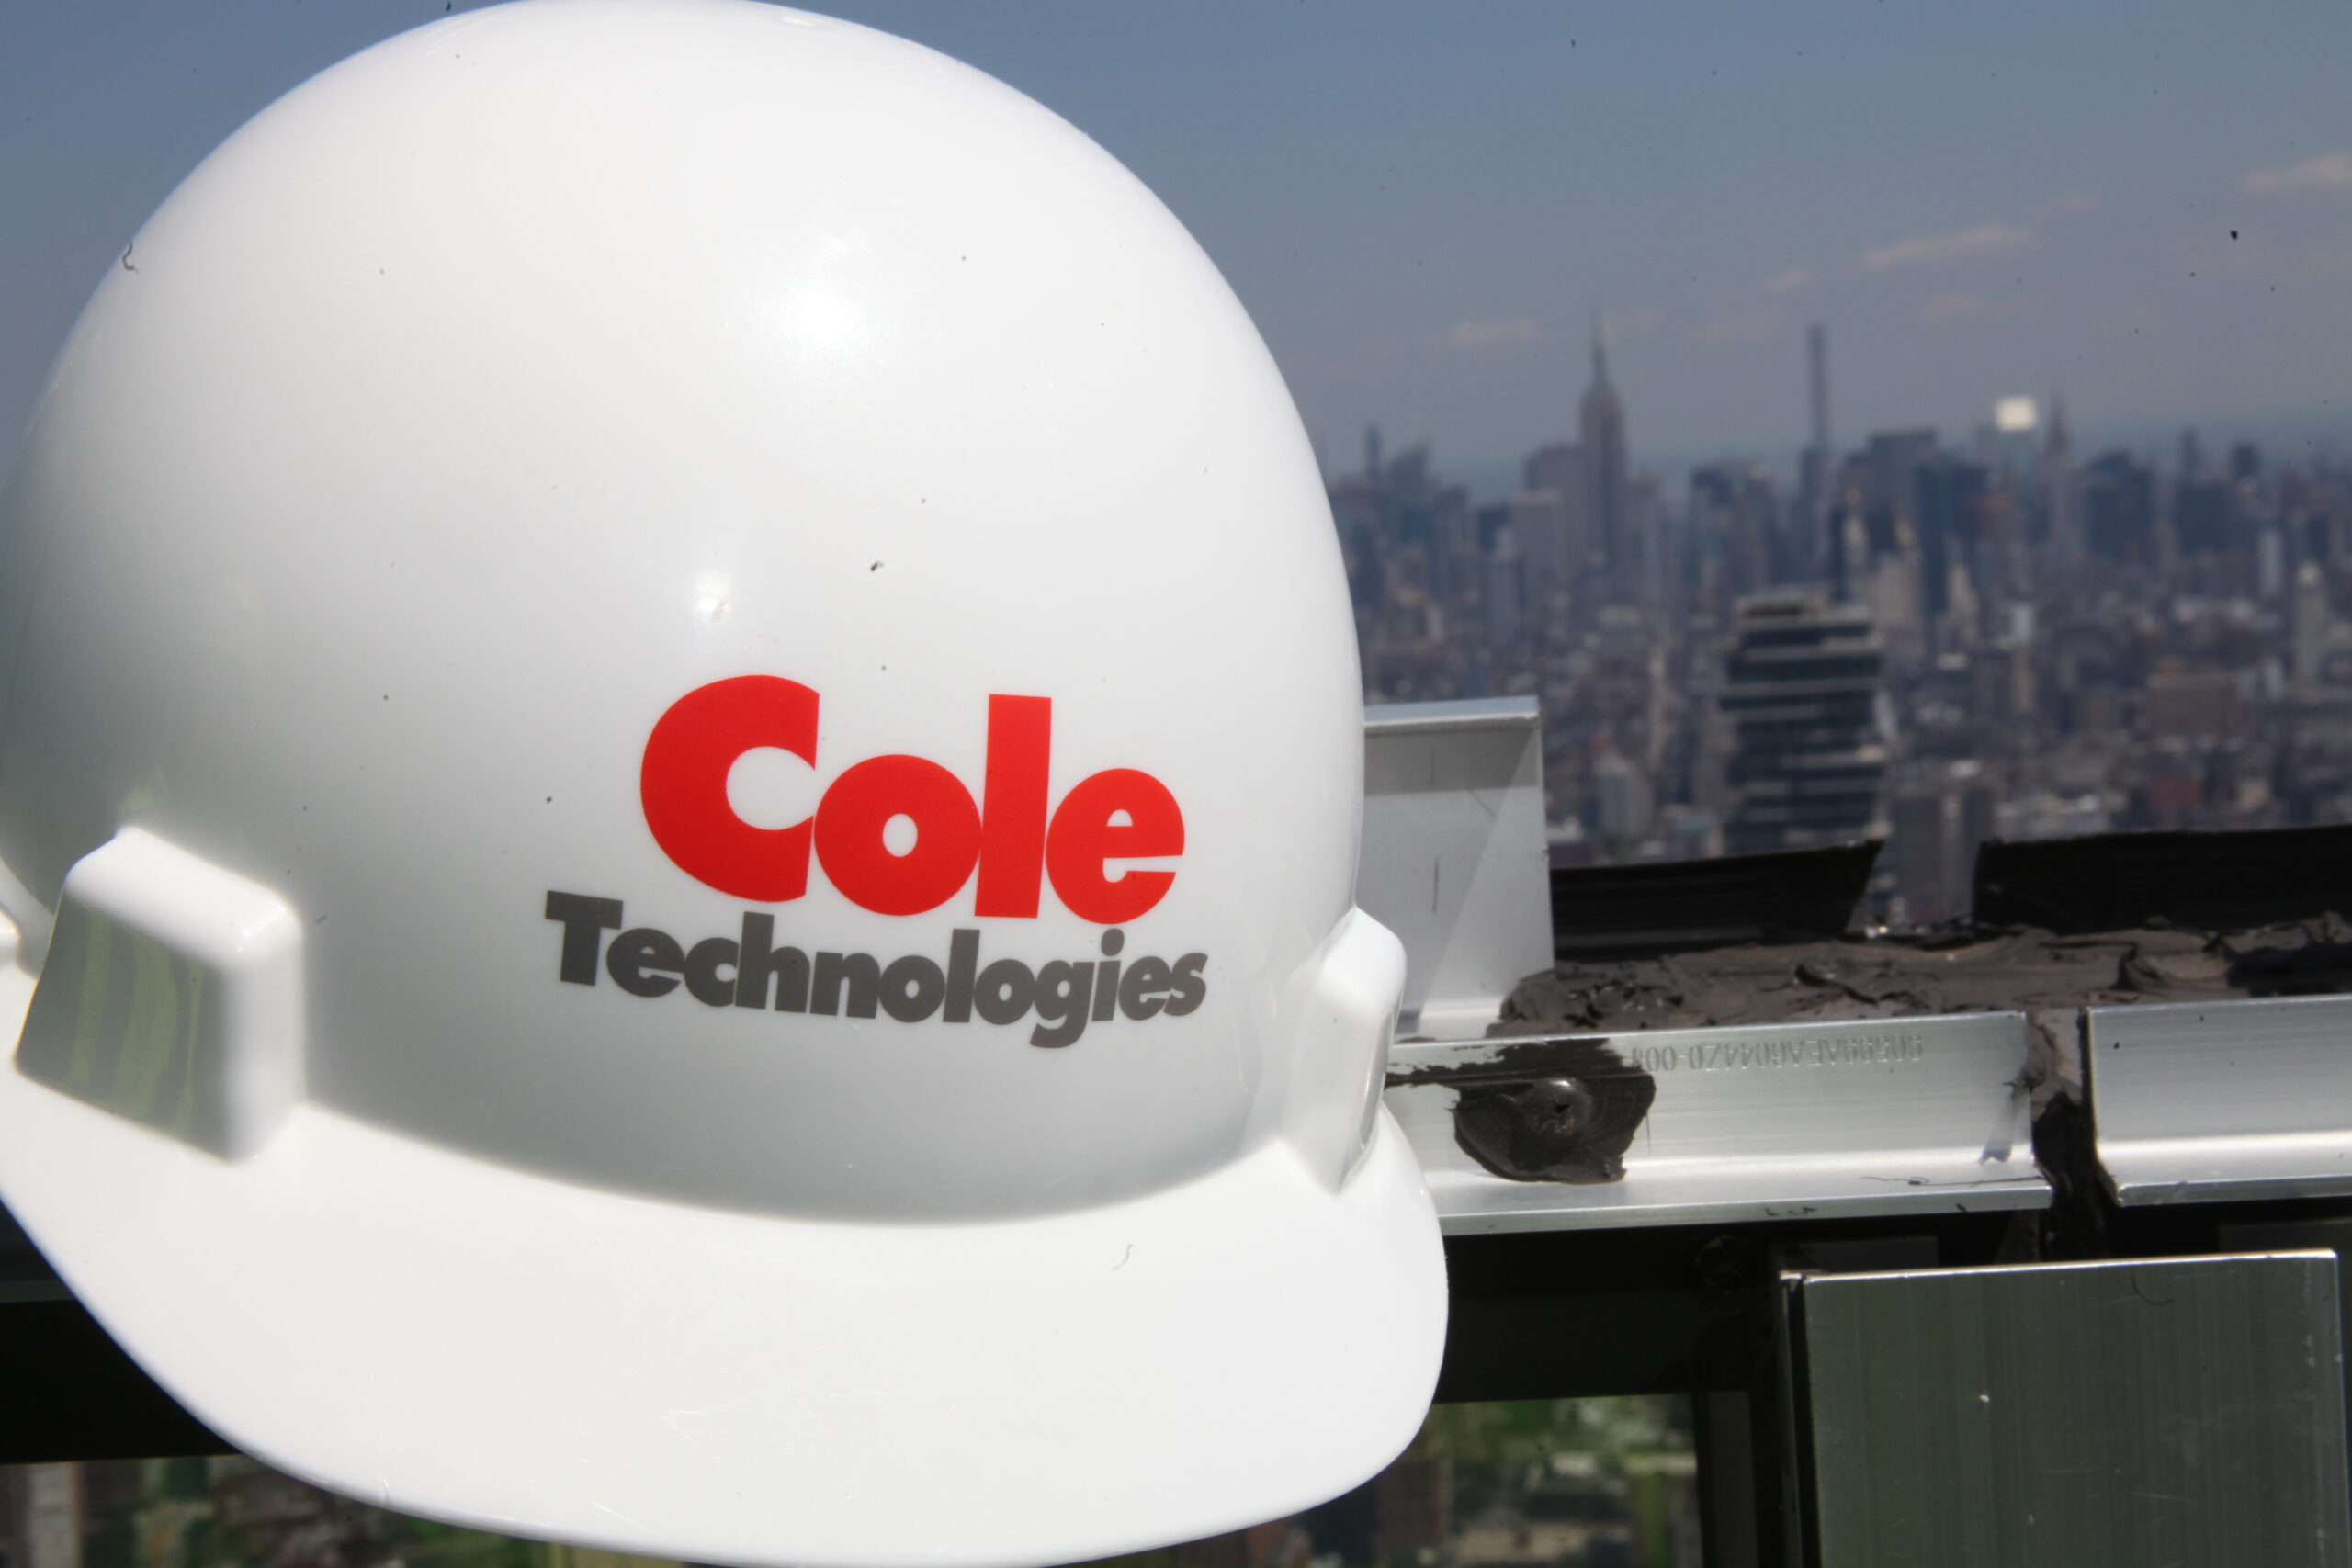 Cole Technologies Group was established in a small office in Ossining, New York, with two employees; the founder and an administrative assistant.